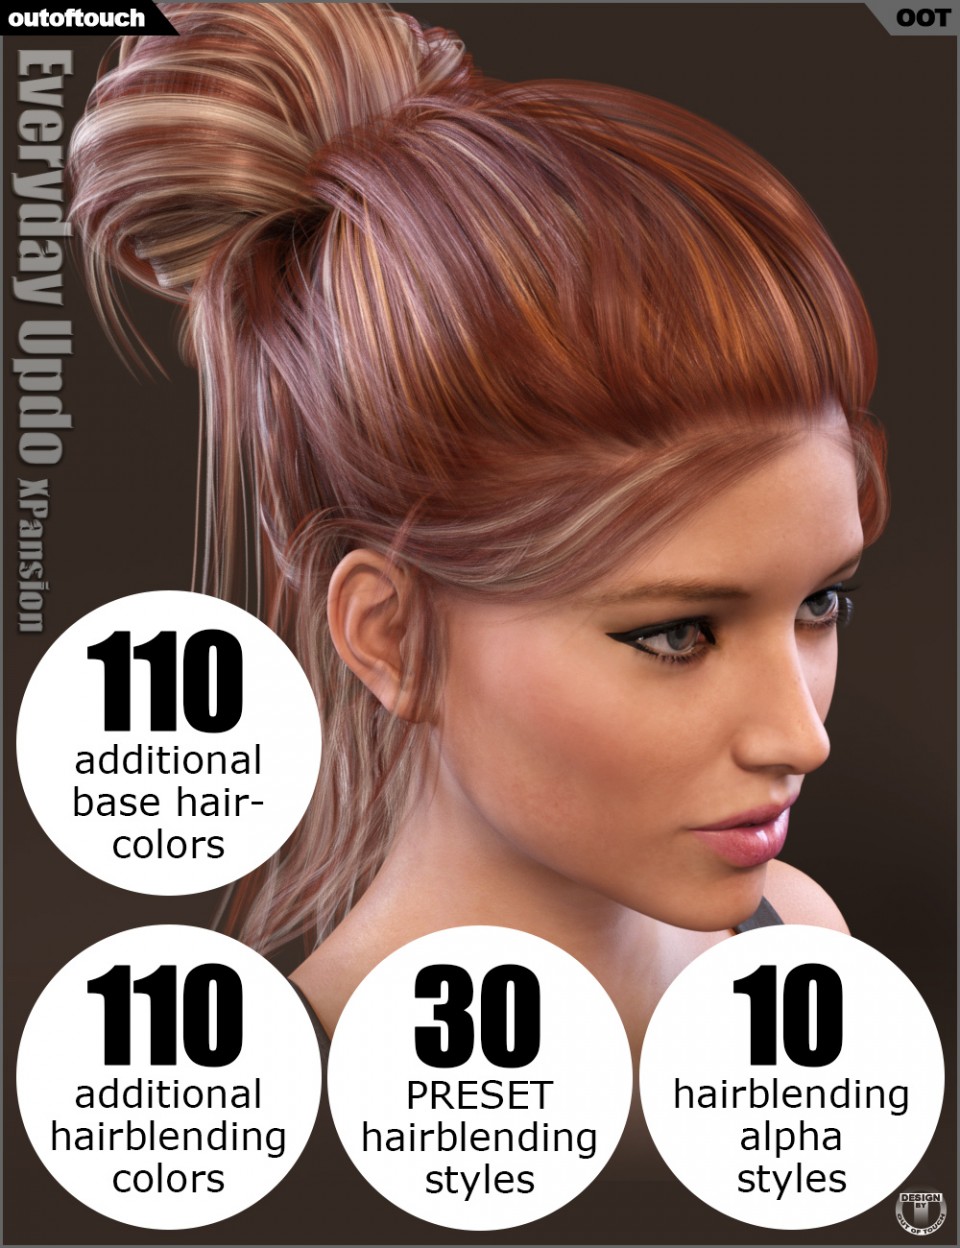 Everyday Updo Hair and OOT Hairblending 2.0 Texture XPansion_DAZ3D下载站